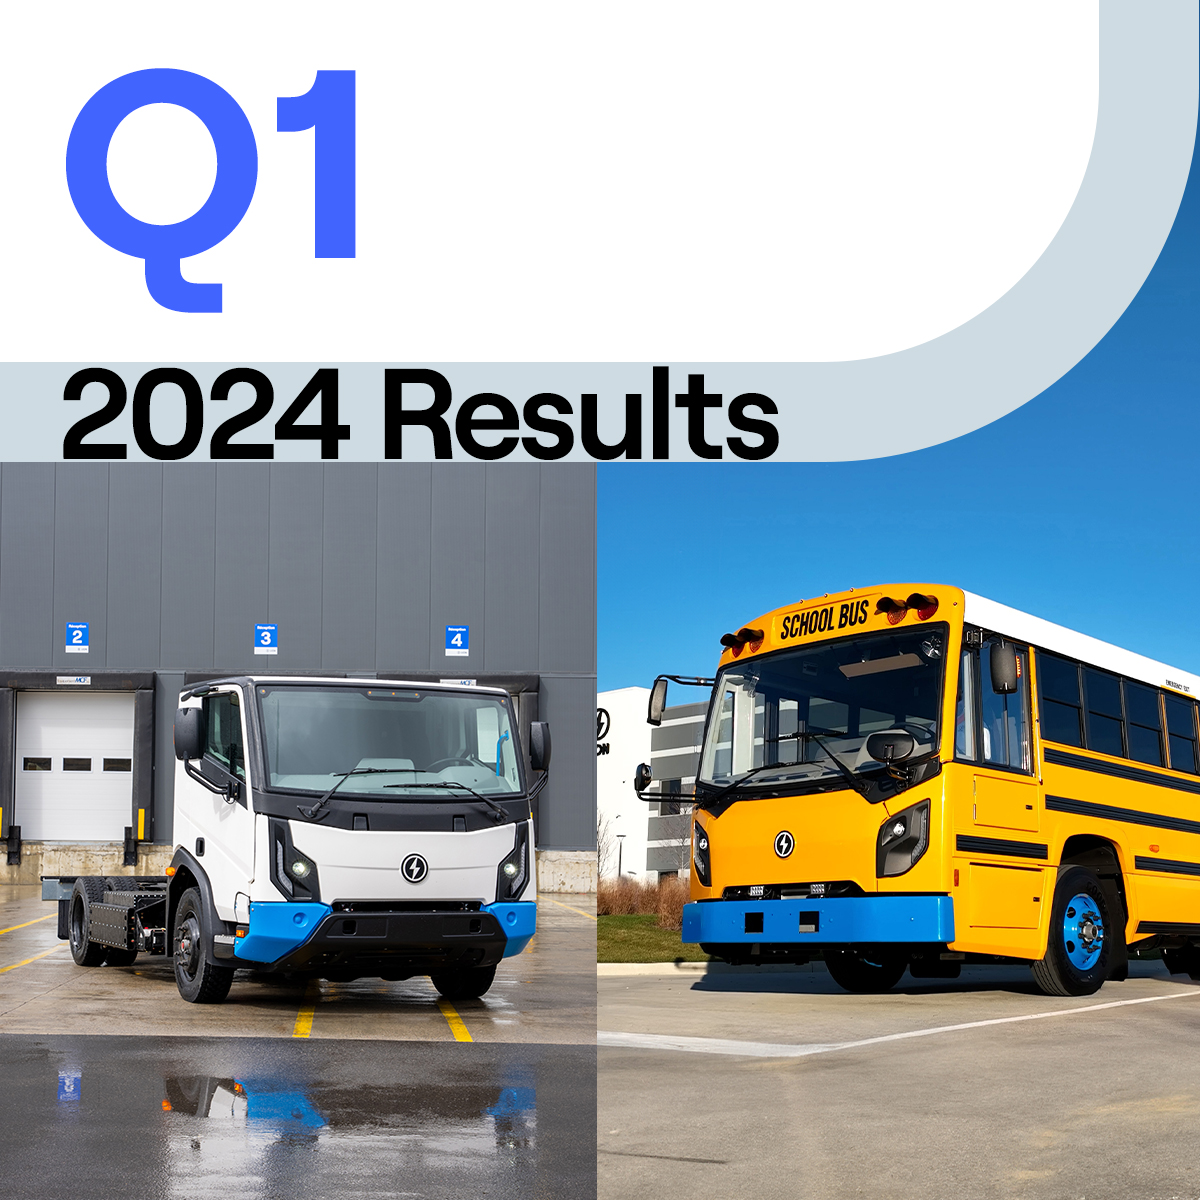 Lion ⚡ announces its financial and operating results for the first quarter of fiscal year 2024, which ended on March 31, 2024. 📖 Read more about it here: ow.ly/bX5F50RzxcC #LionElectric #pressrelease #financialresults #electrification #electric